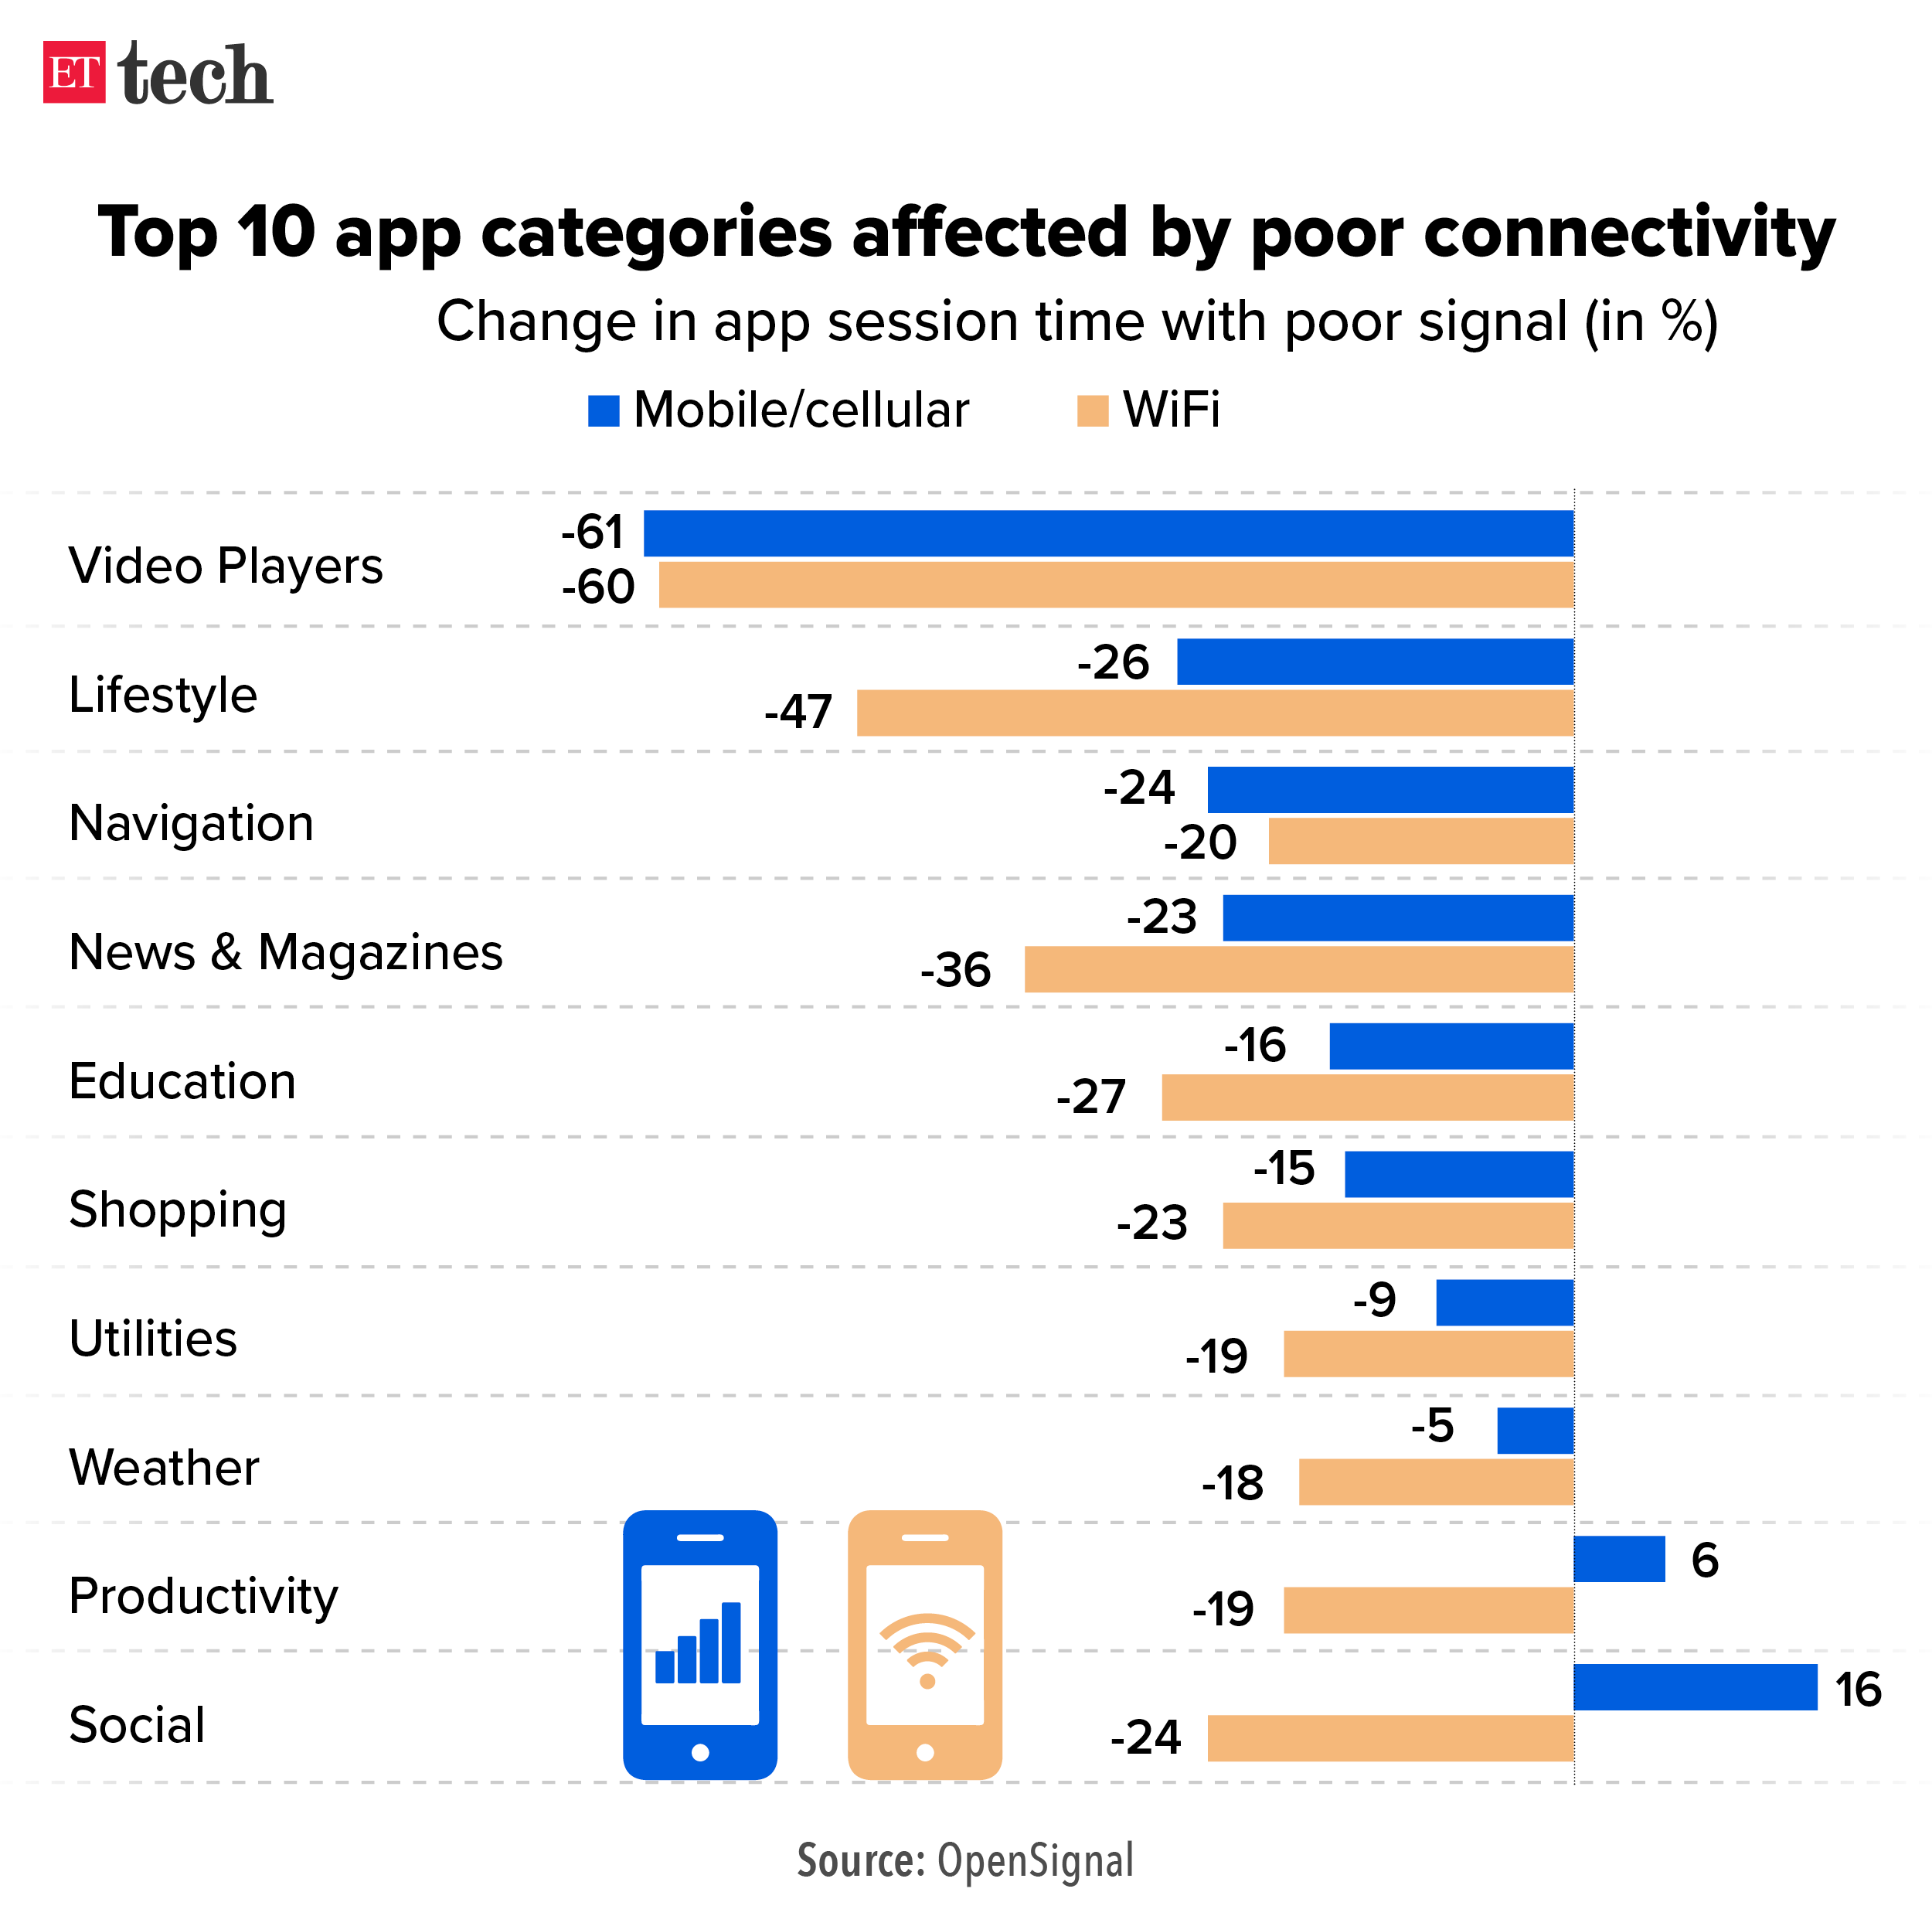 Top 10 app categories affected by poor connectivity